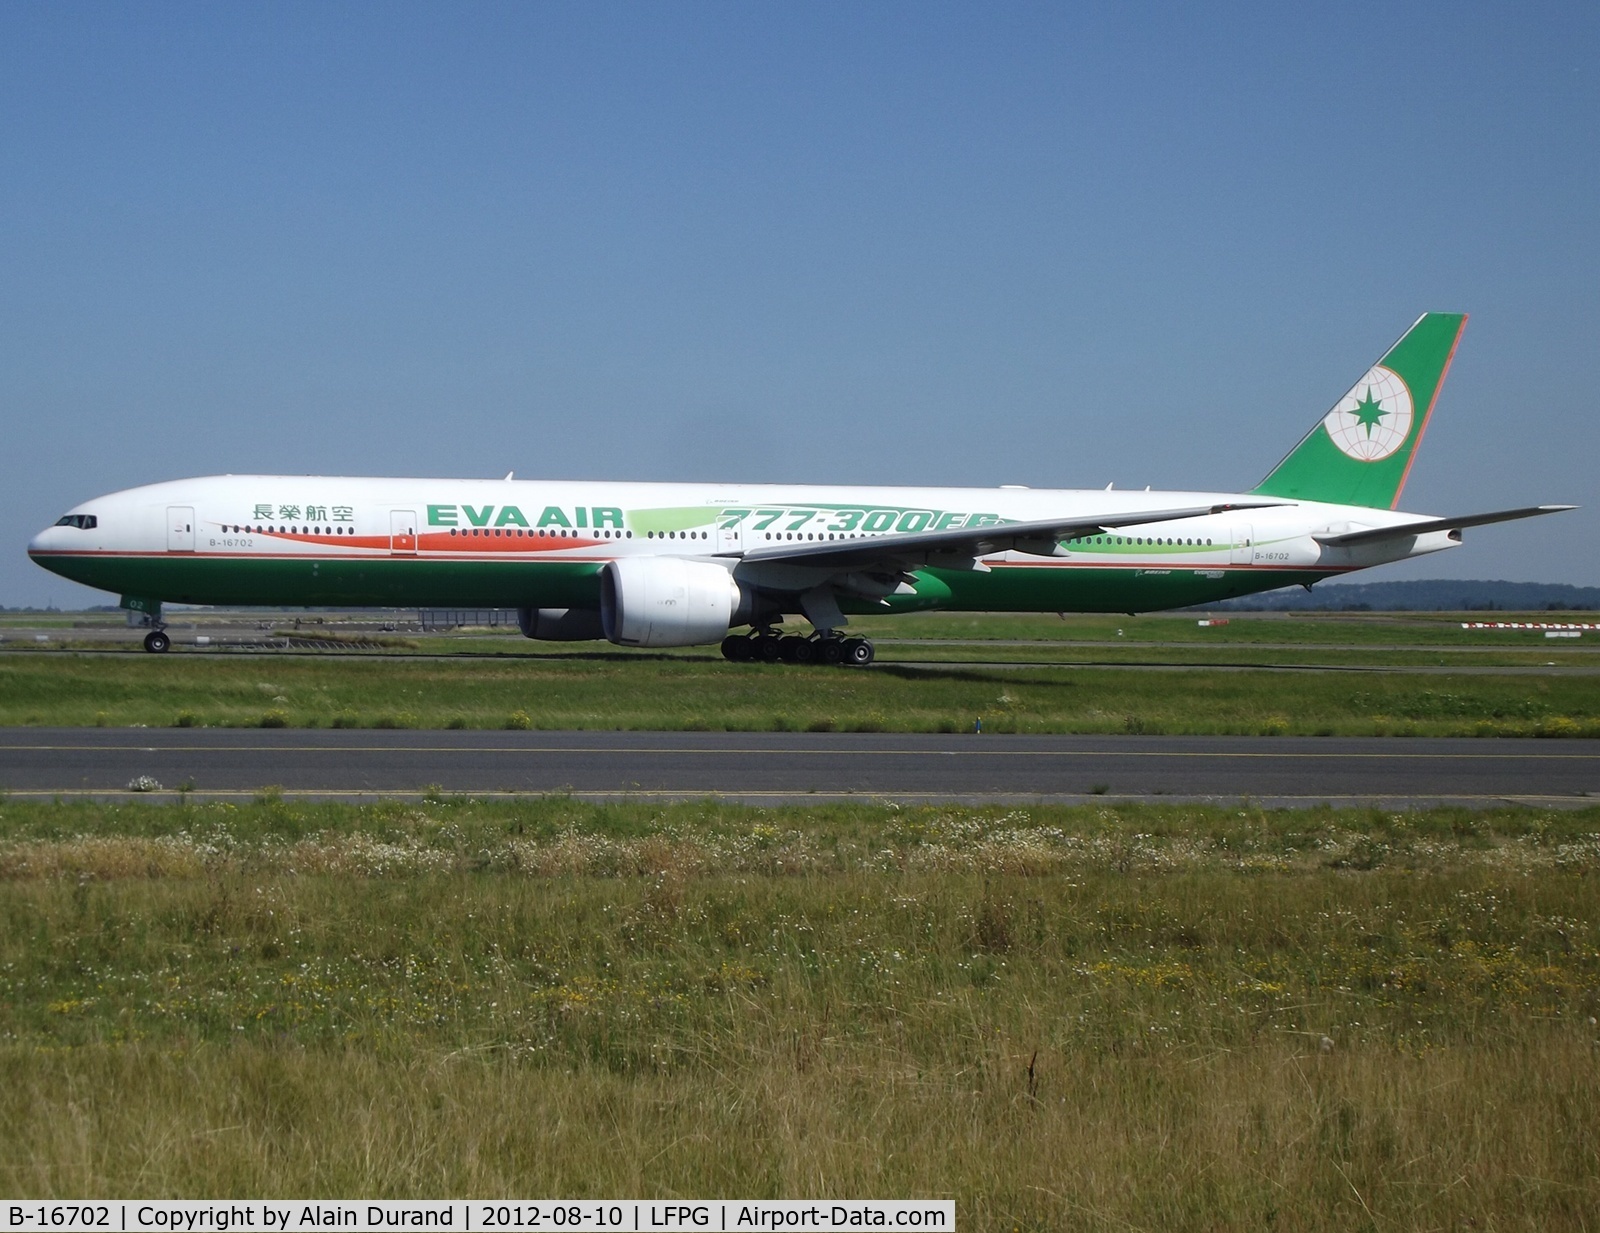 B-16702, 2005 Boeing 777-35E/ER C/N 32640, C/N 531, delivered new in 2005. Special 777-300ER livery is not a common sight at CDG as far Eva Air is concerned.